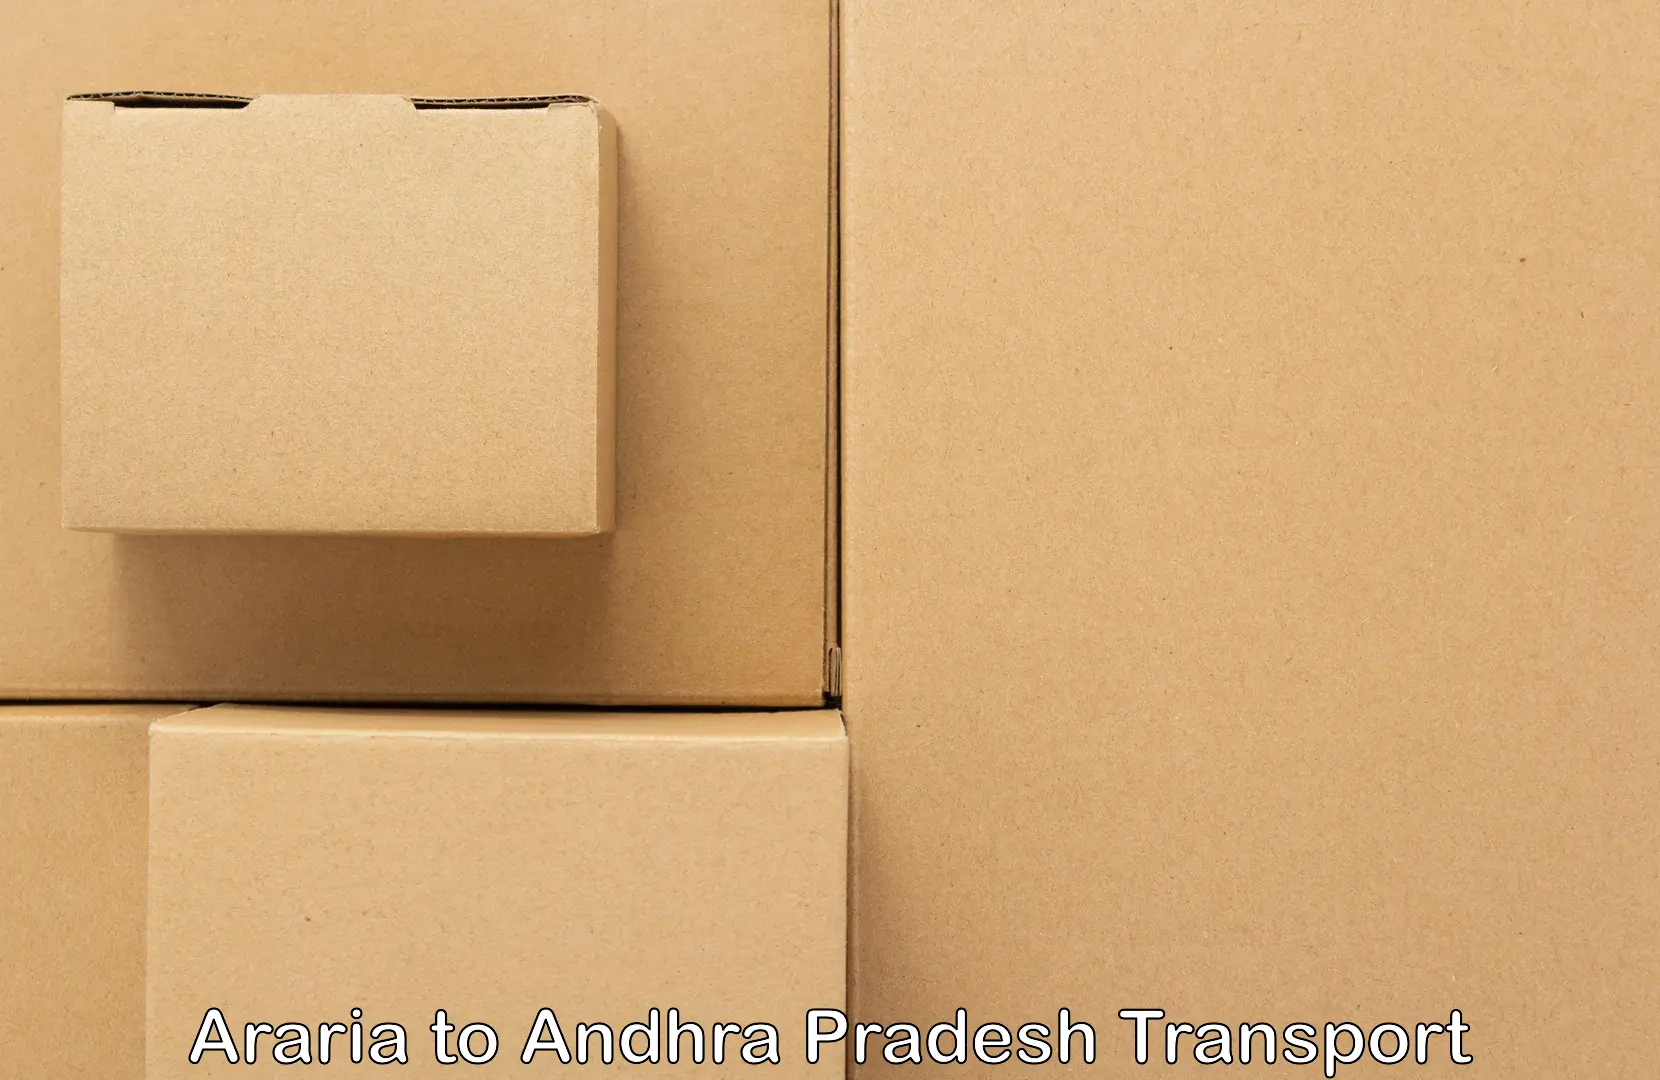 Transport services in Araria to Visakhapatnam Port